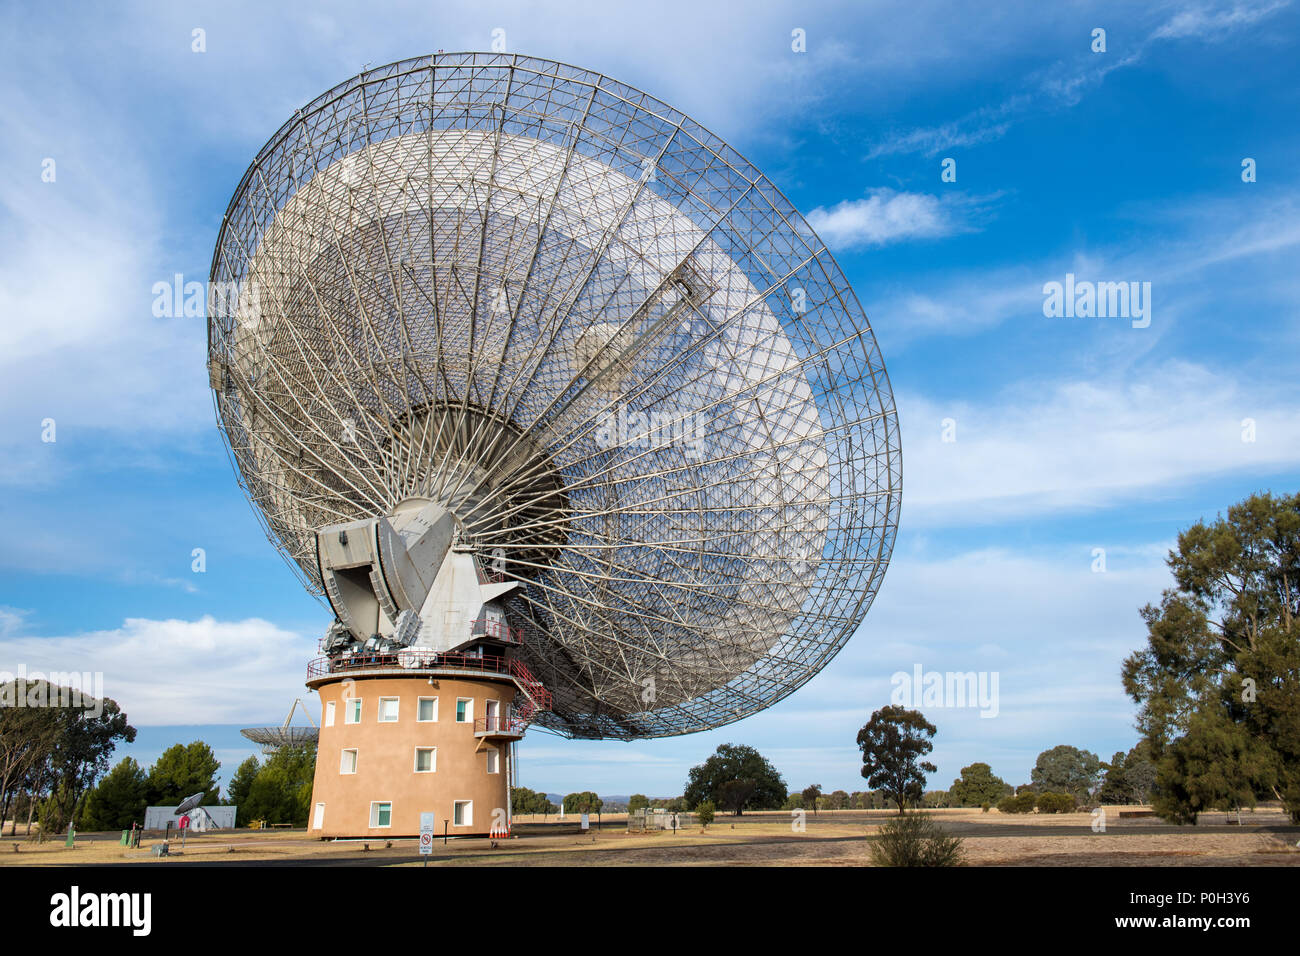 Parkes radio telescope is a 64-m diameter parabolic dish used for radio  astronomy. This Telescope brought live pictures to television when man 1st  landed on the moon in Apollo 11 on 21